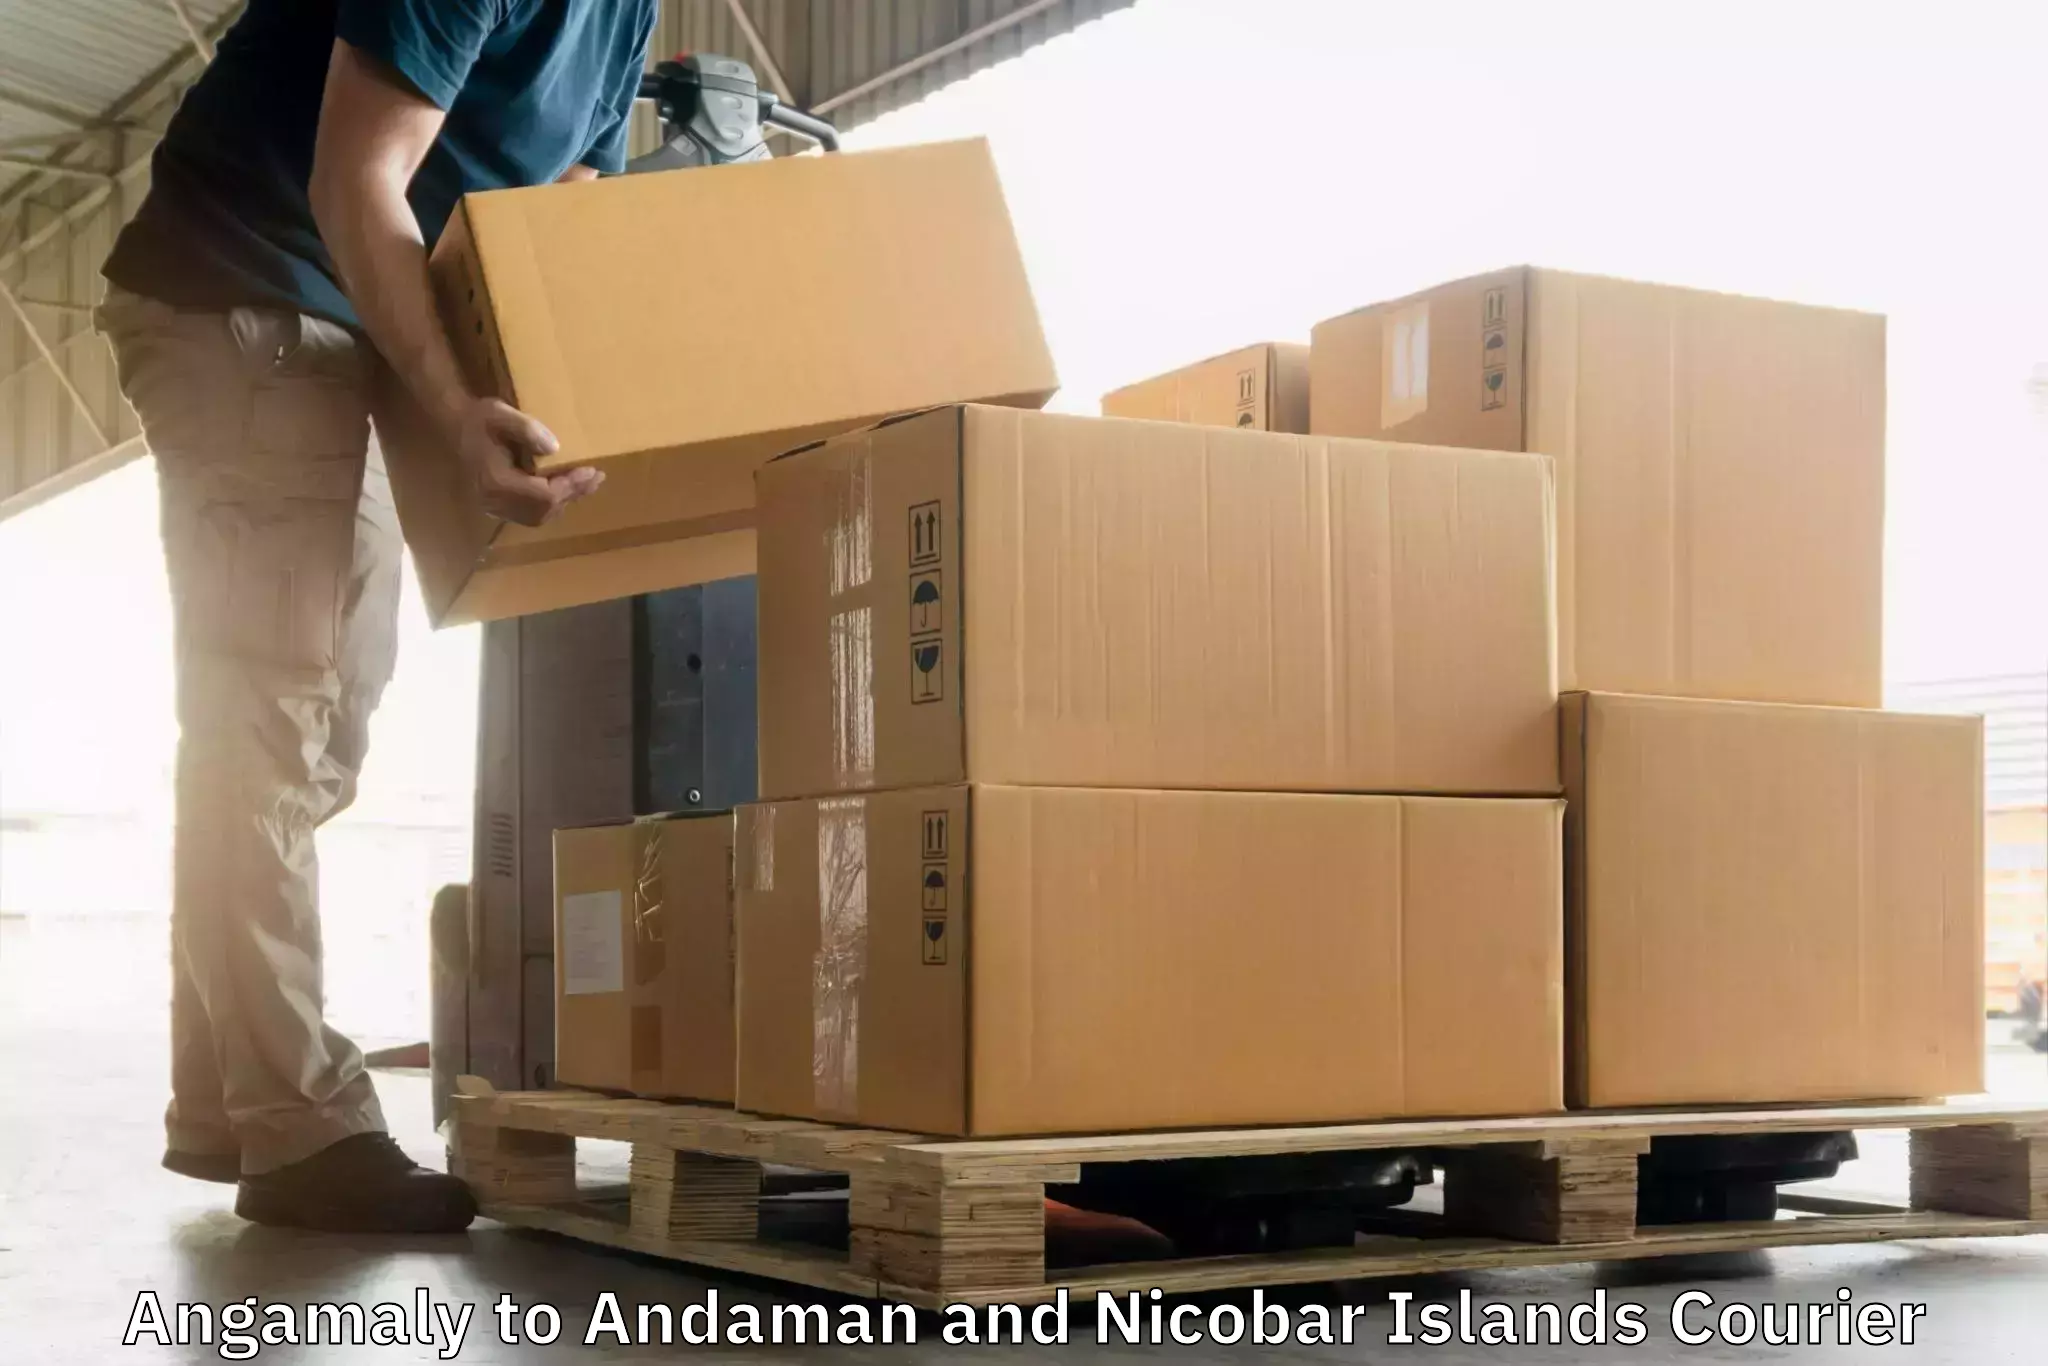 Courier service comparison Angamaly to Andaman and Nicobar Islands